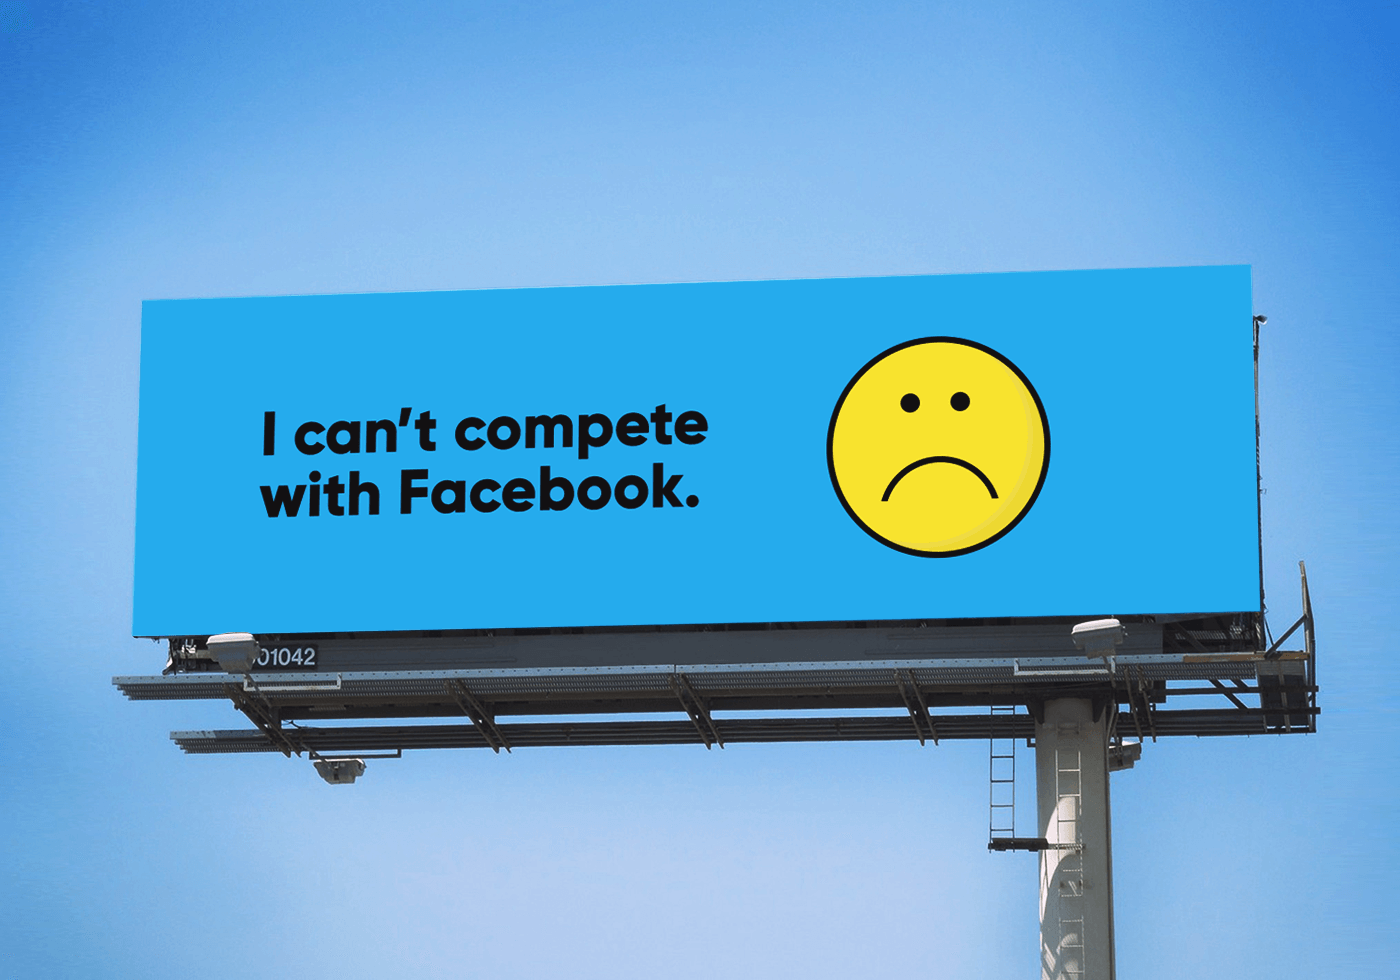 Competing with Facebook